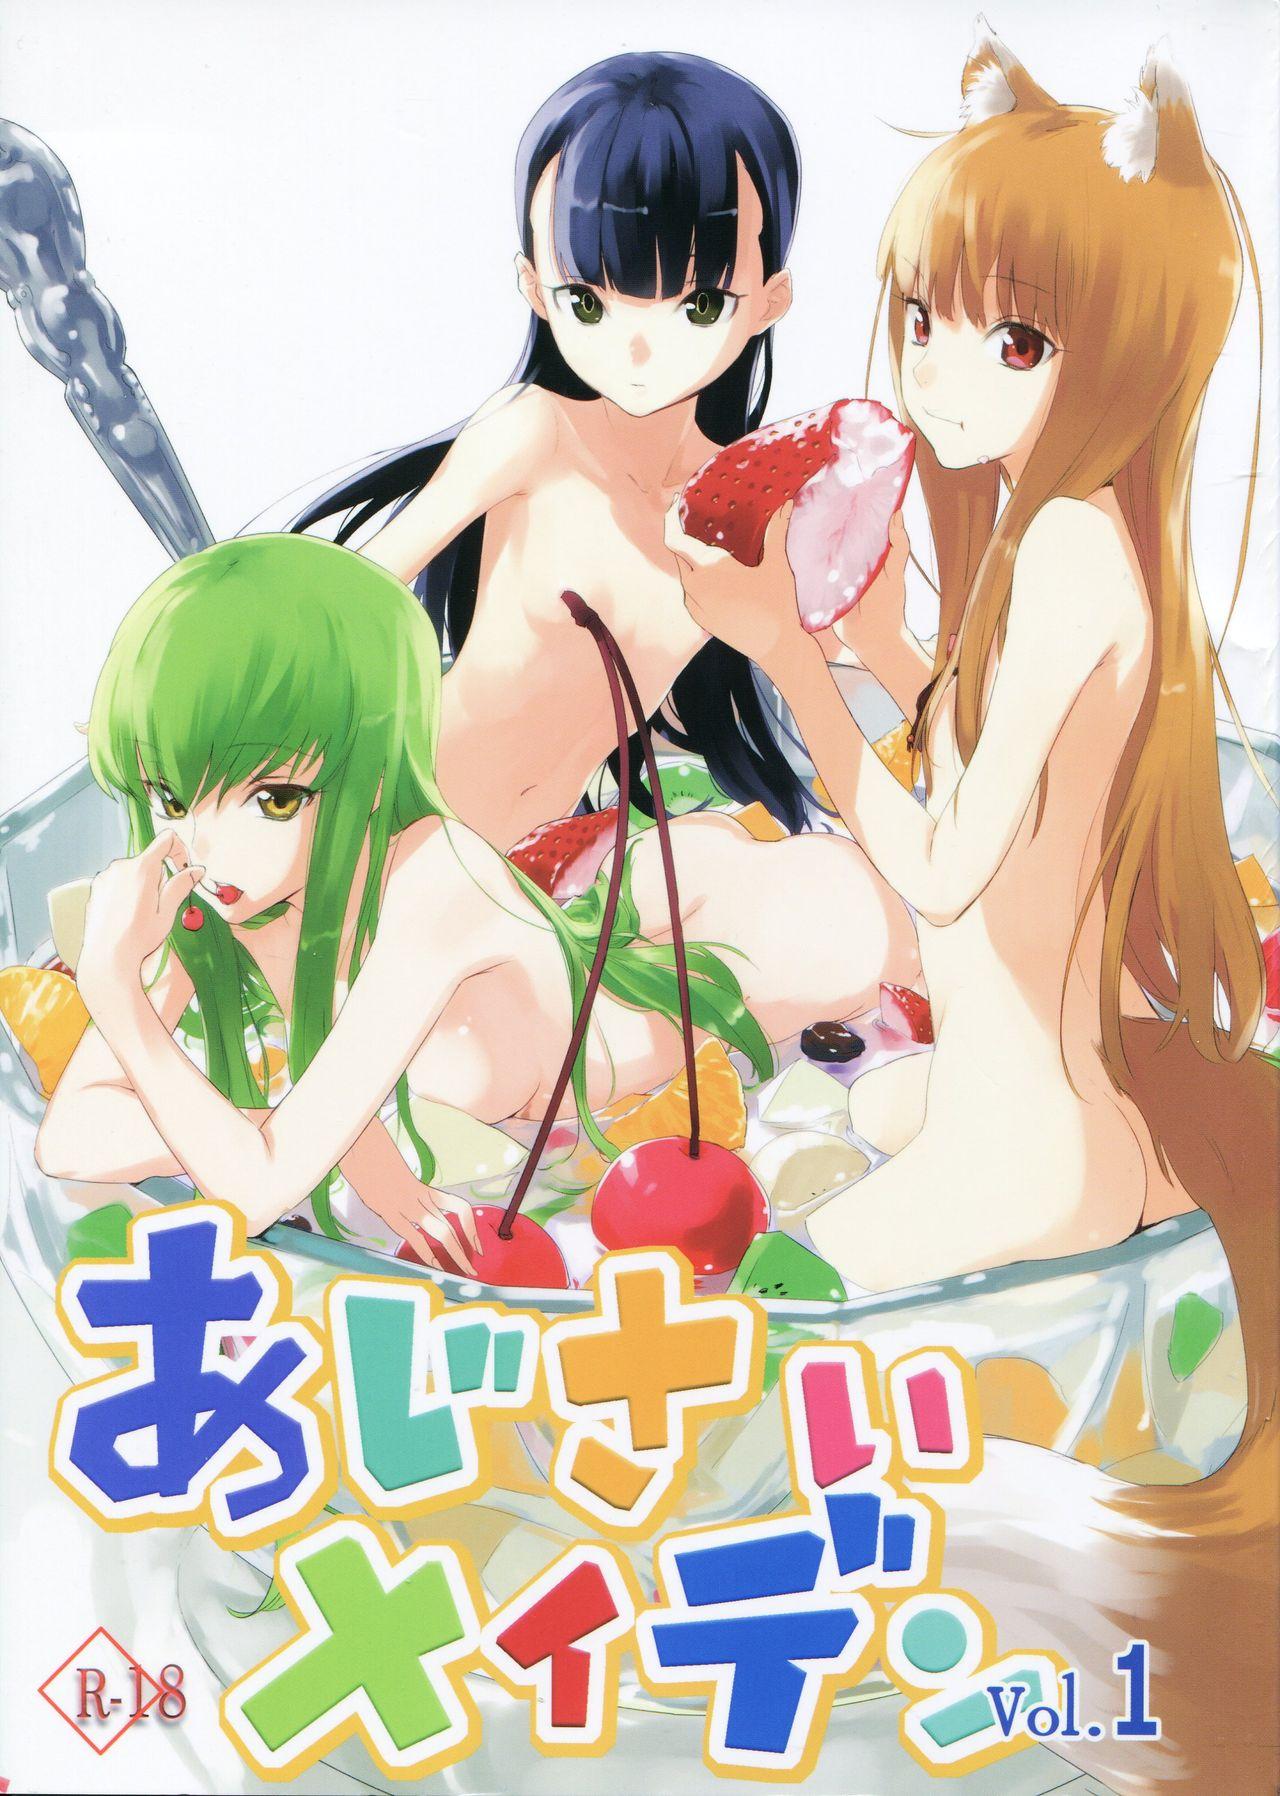 Negao Ajisai Maiden vol.1 - Code geass Spice and wolf Dragons crown Un-go Blackdick - Picture 1